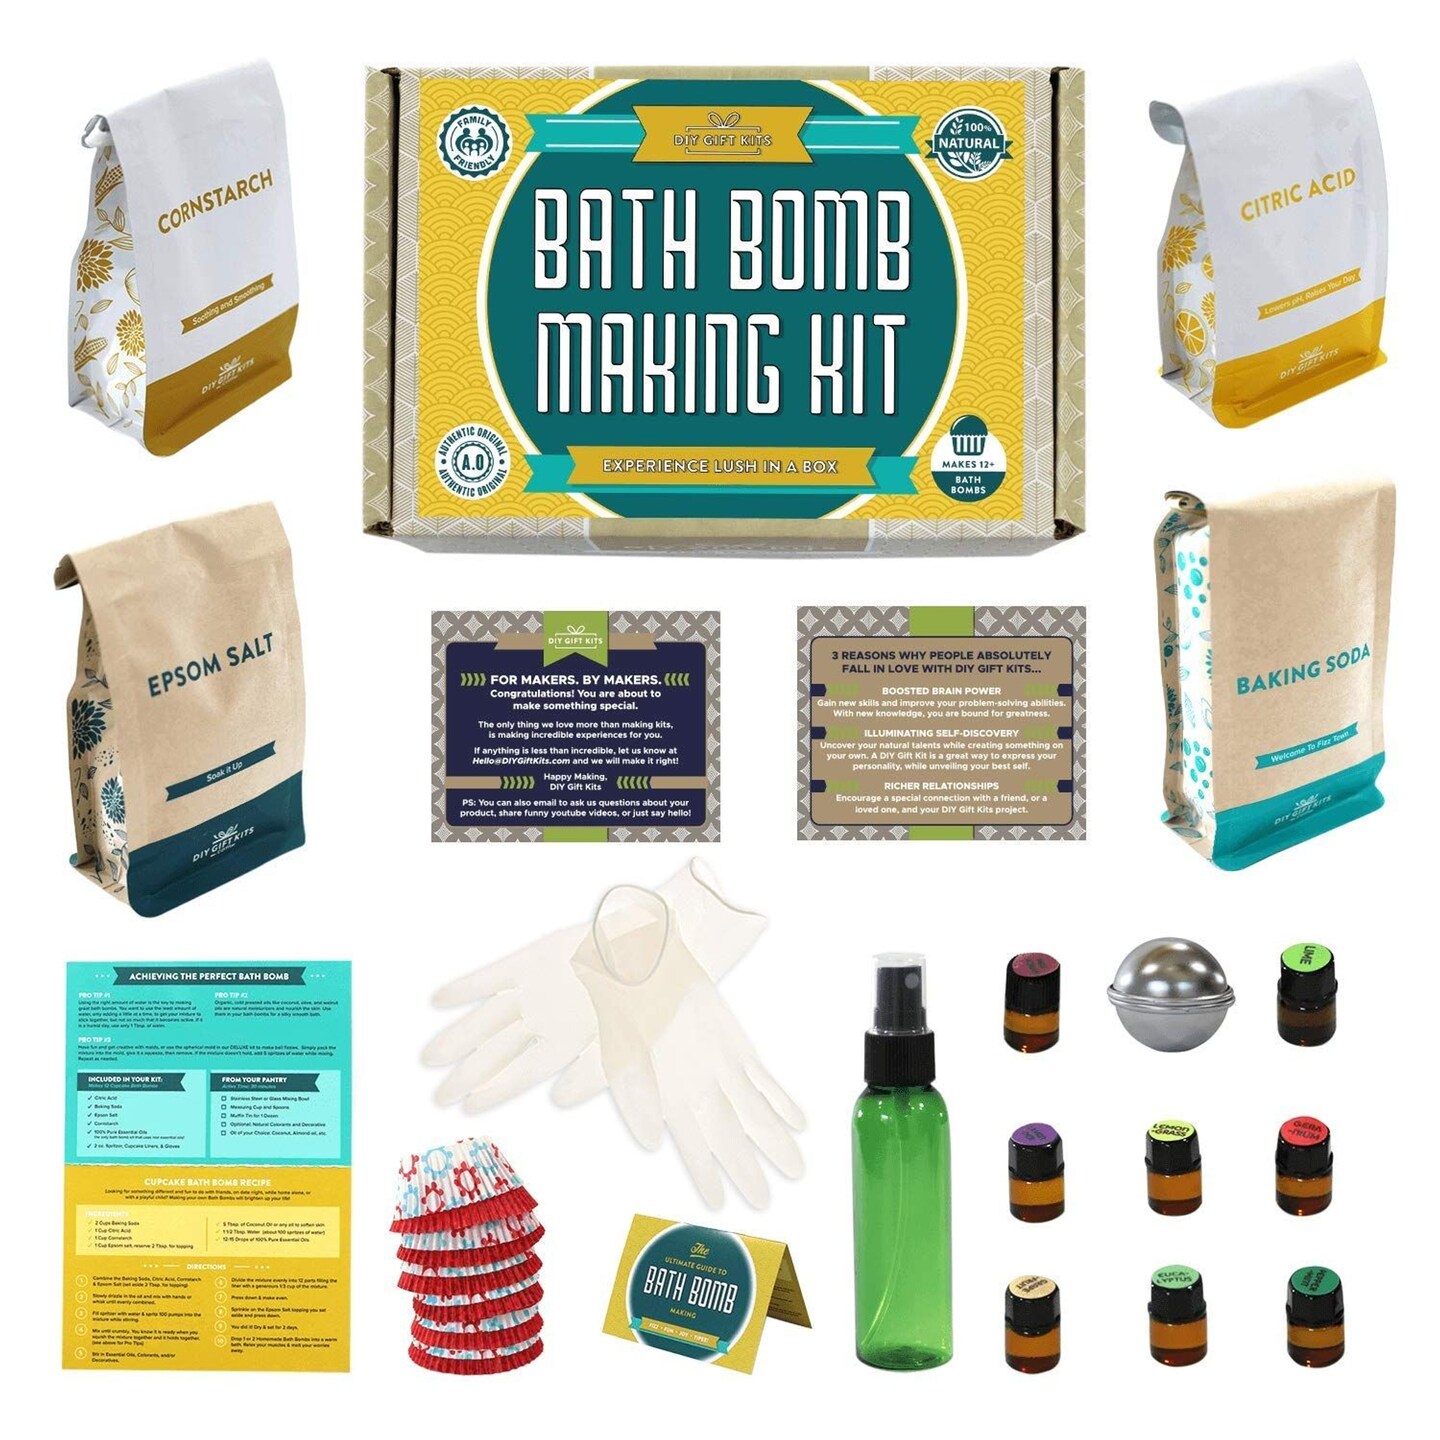 DIY Gift Kits Bath Bomb Making Kit for Kids, Make 12 All Natural Bath Bombs at Home, Made in the USA, 100% Pure, 7 Essential Oils, Epsom Salts, Cupcake Mold Liners, Recipes, Gift Box Included